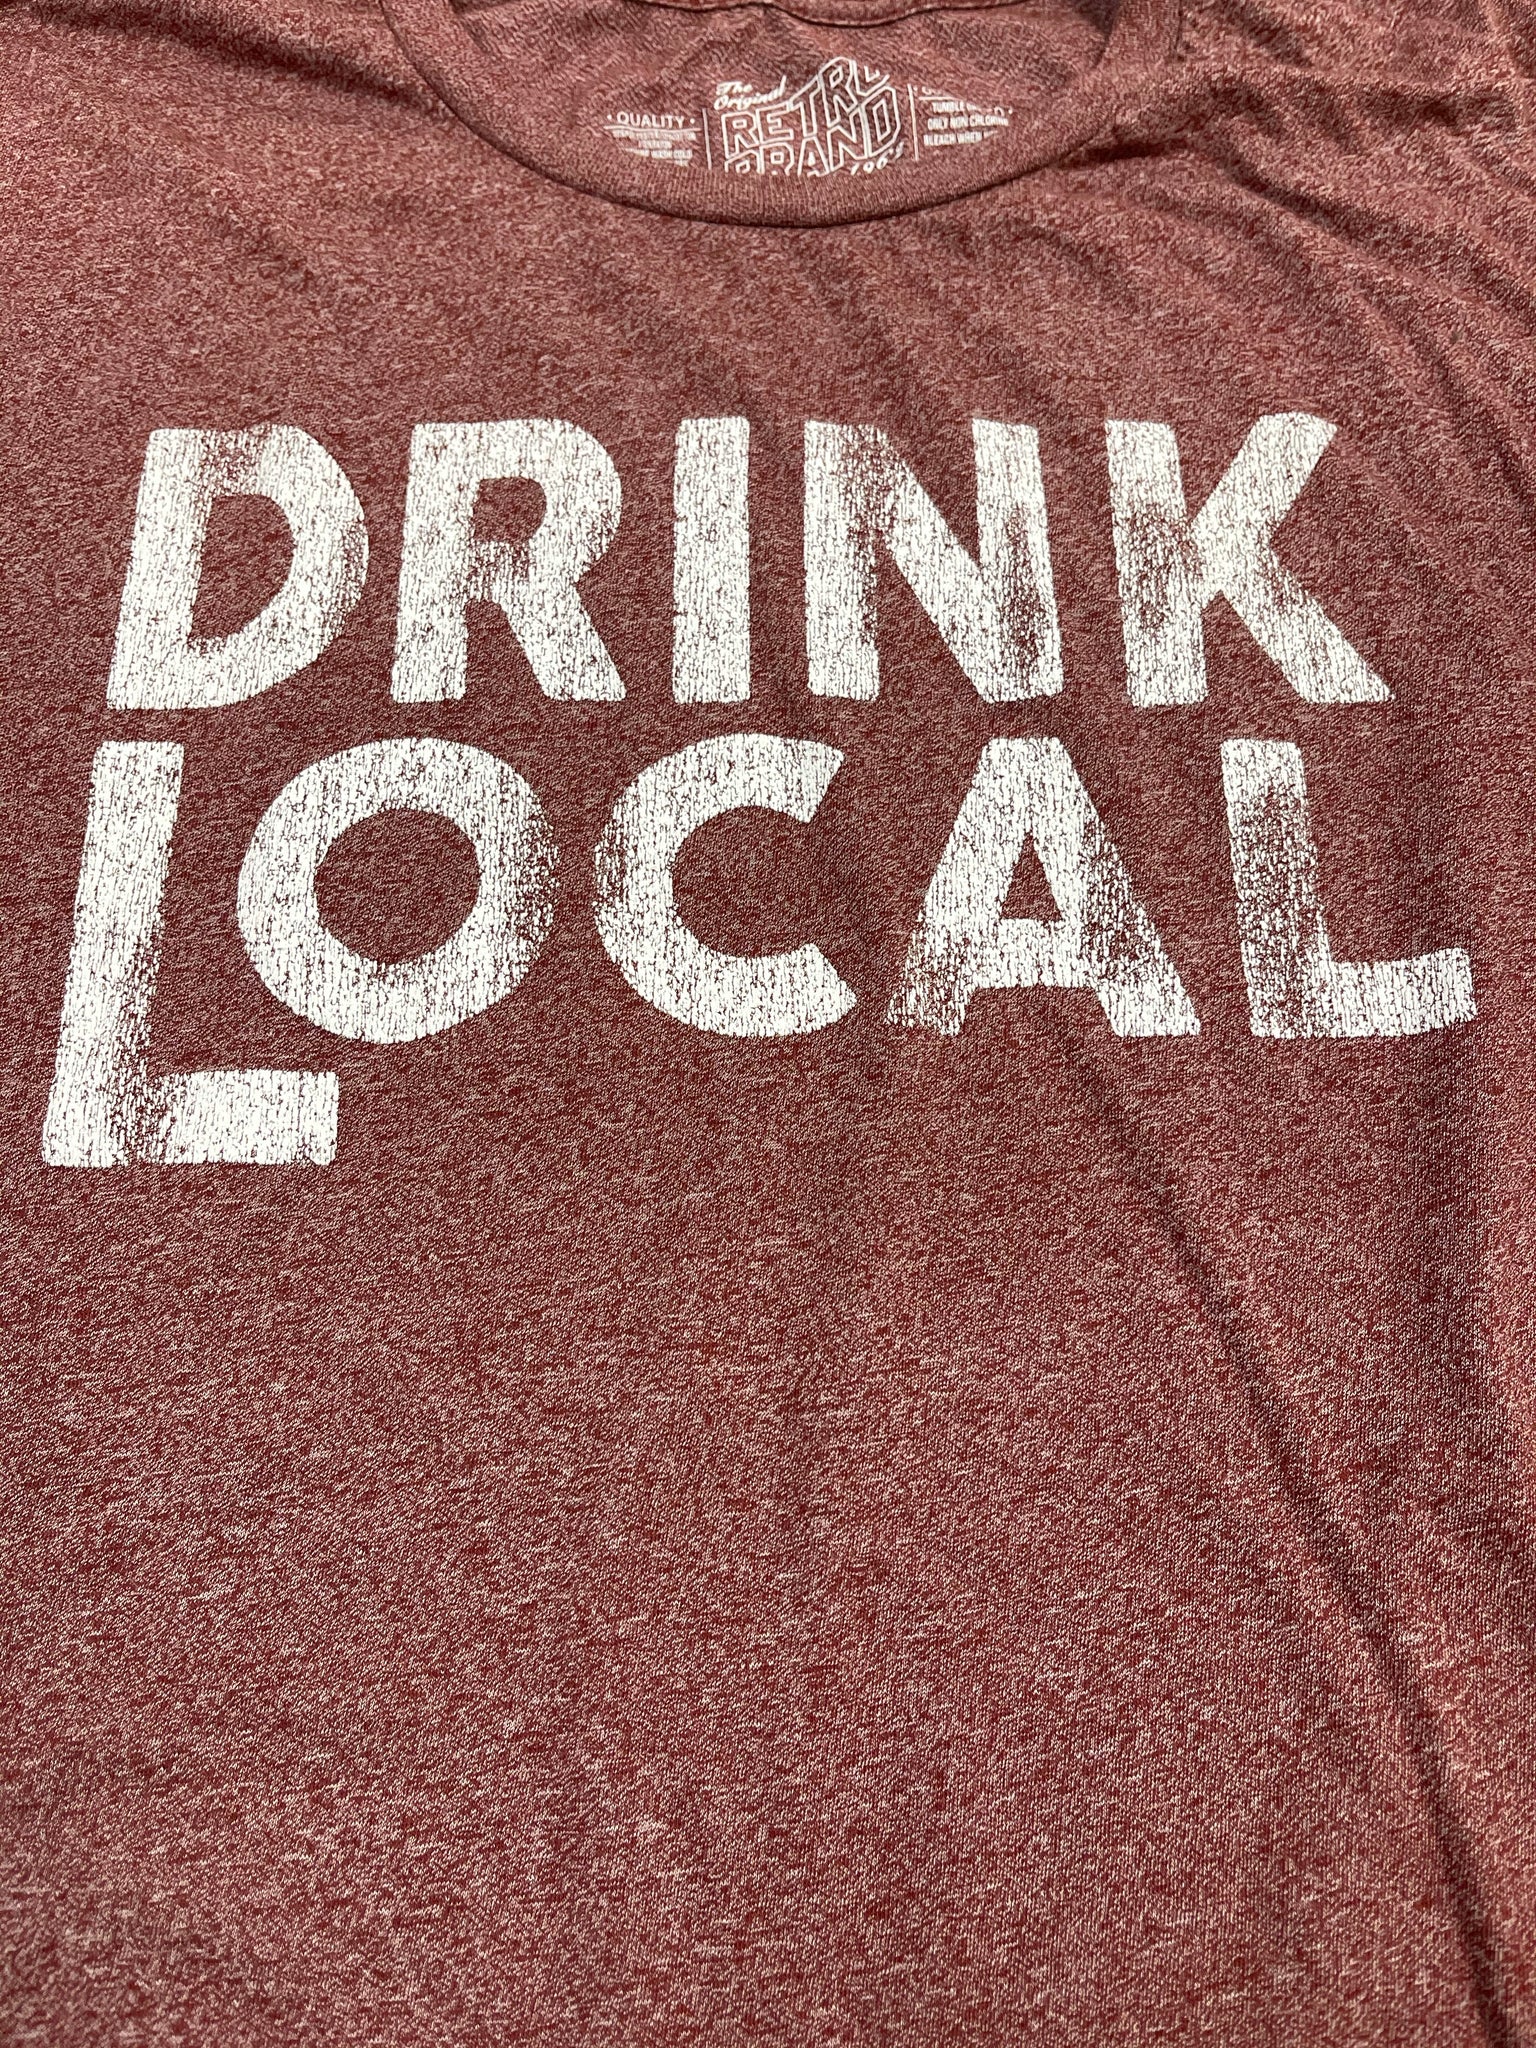 COCKTAIL TEE - DRINK LOCAL